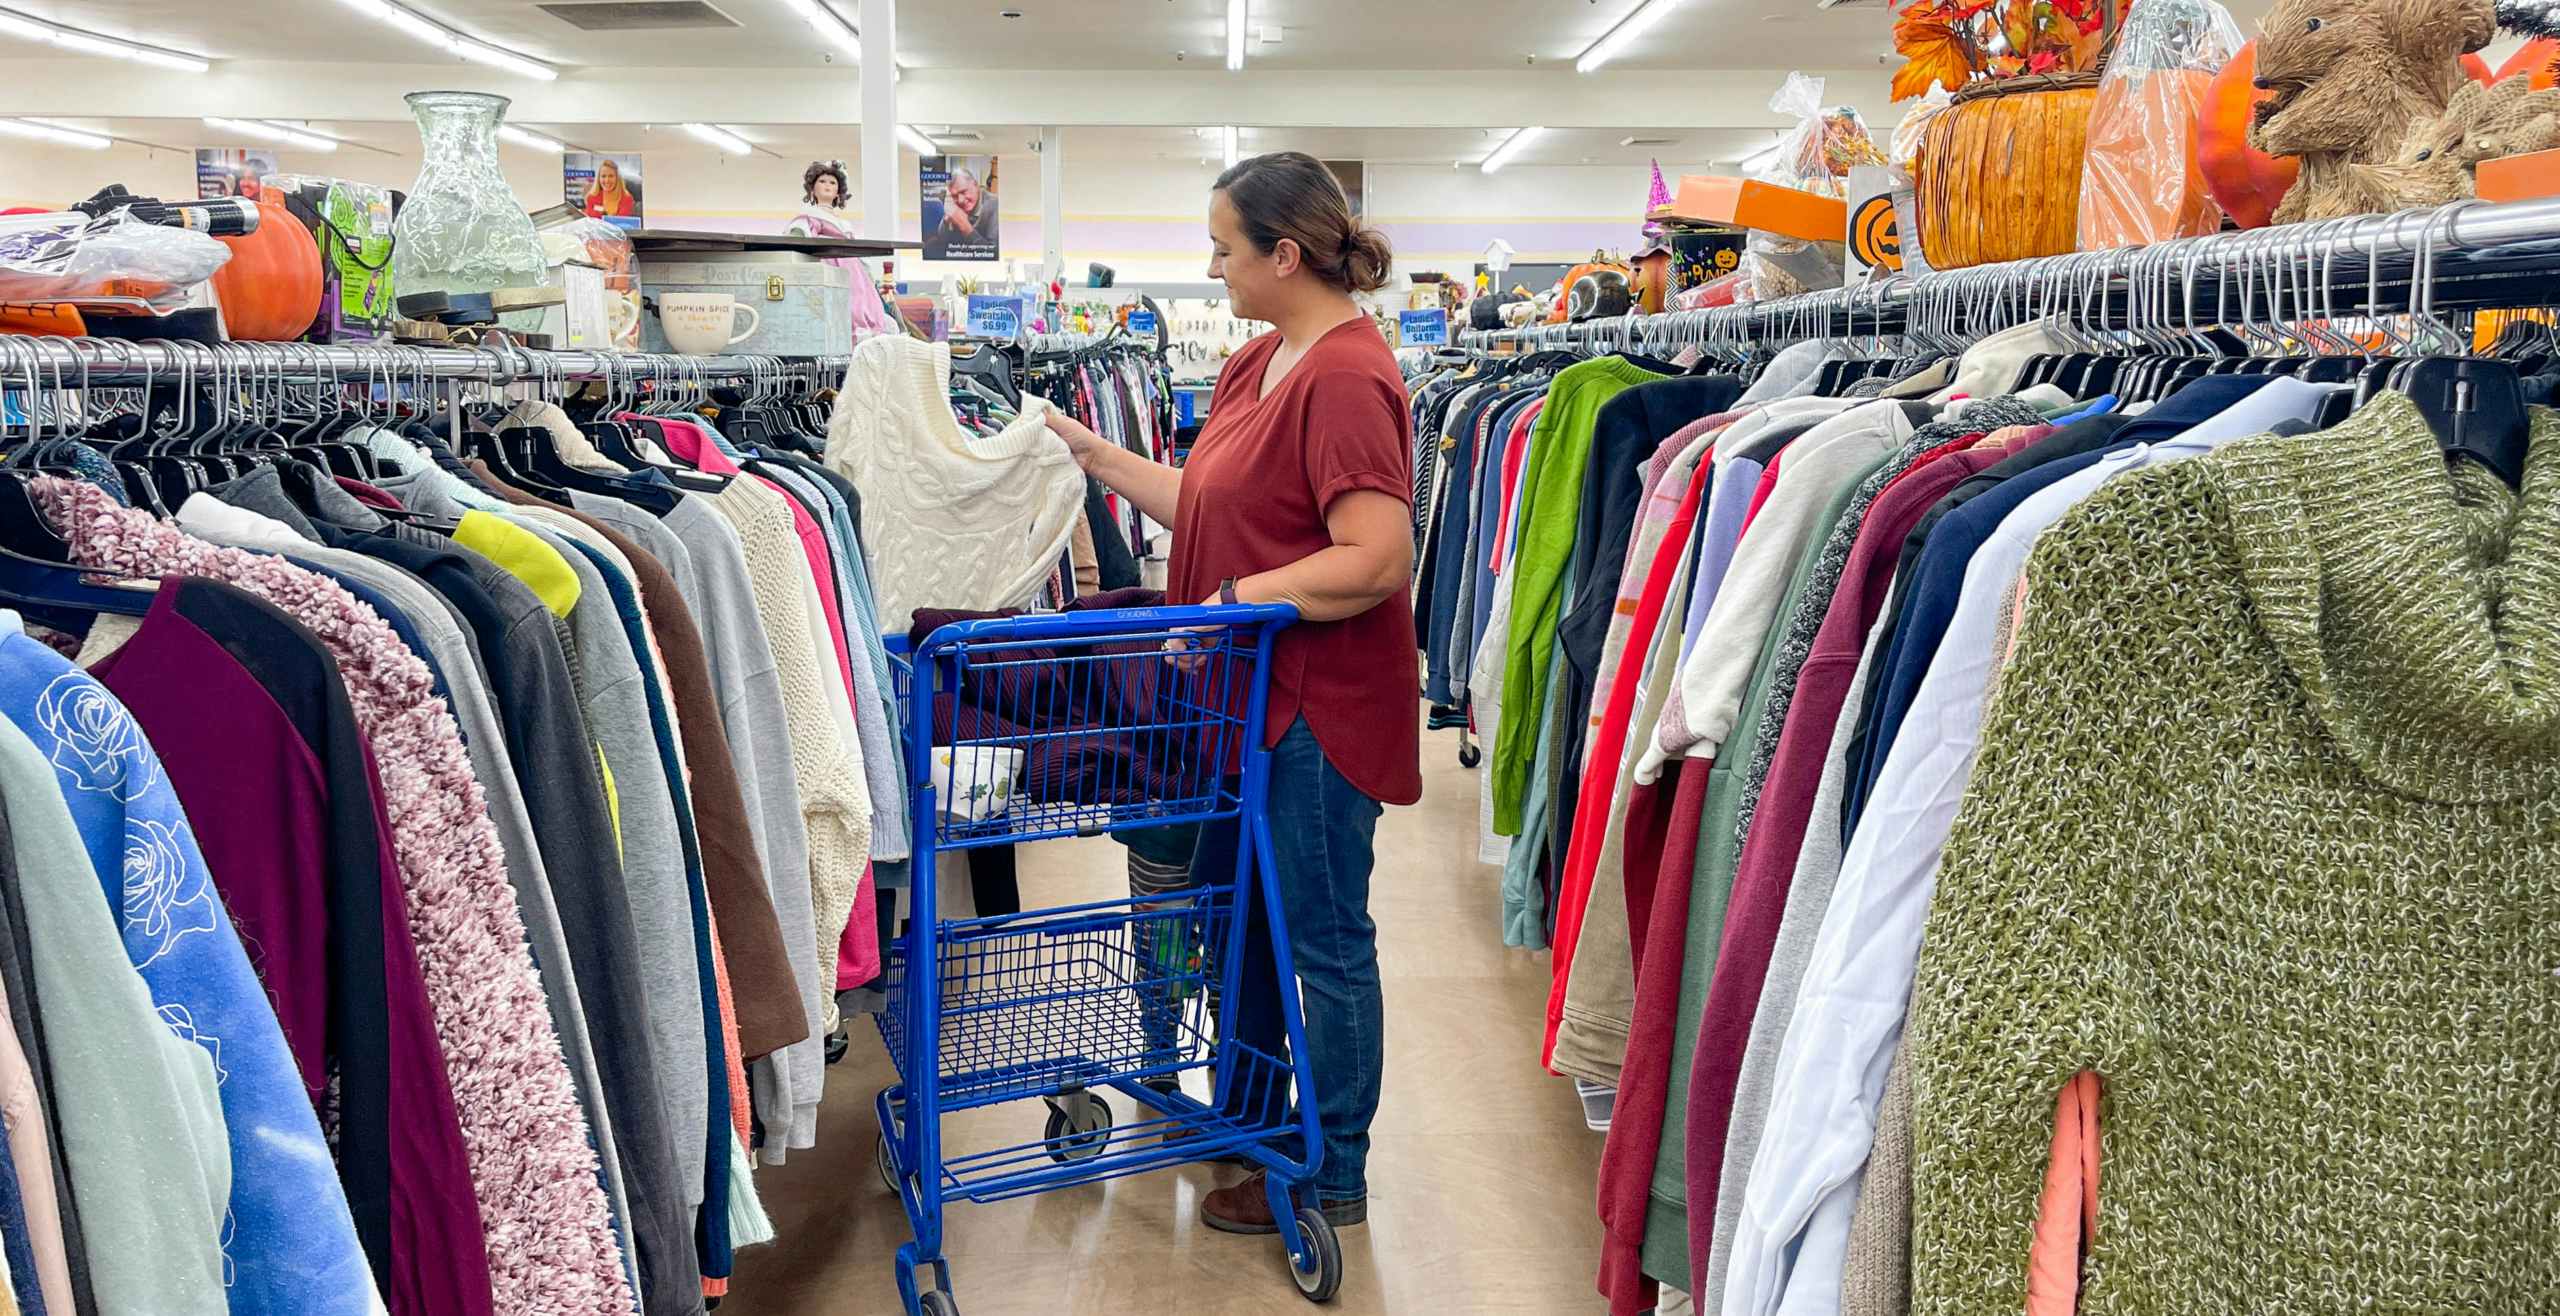 Go treasure hunting at the world's largest thrift store